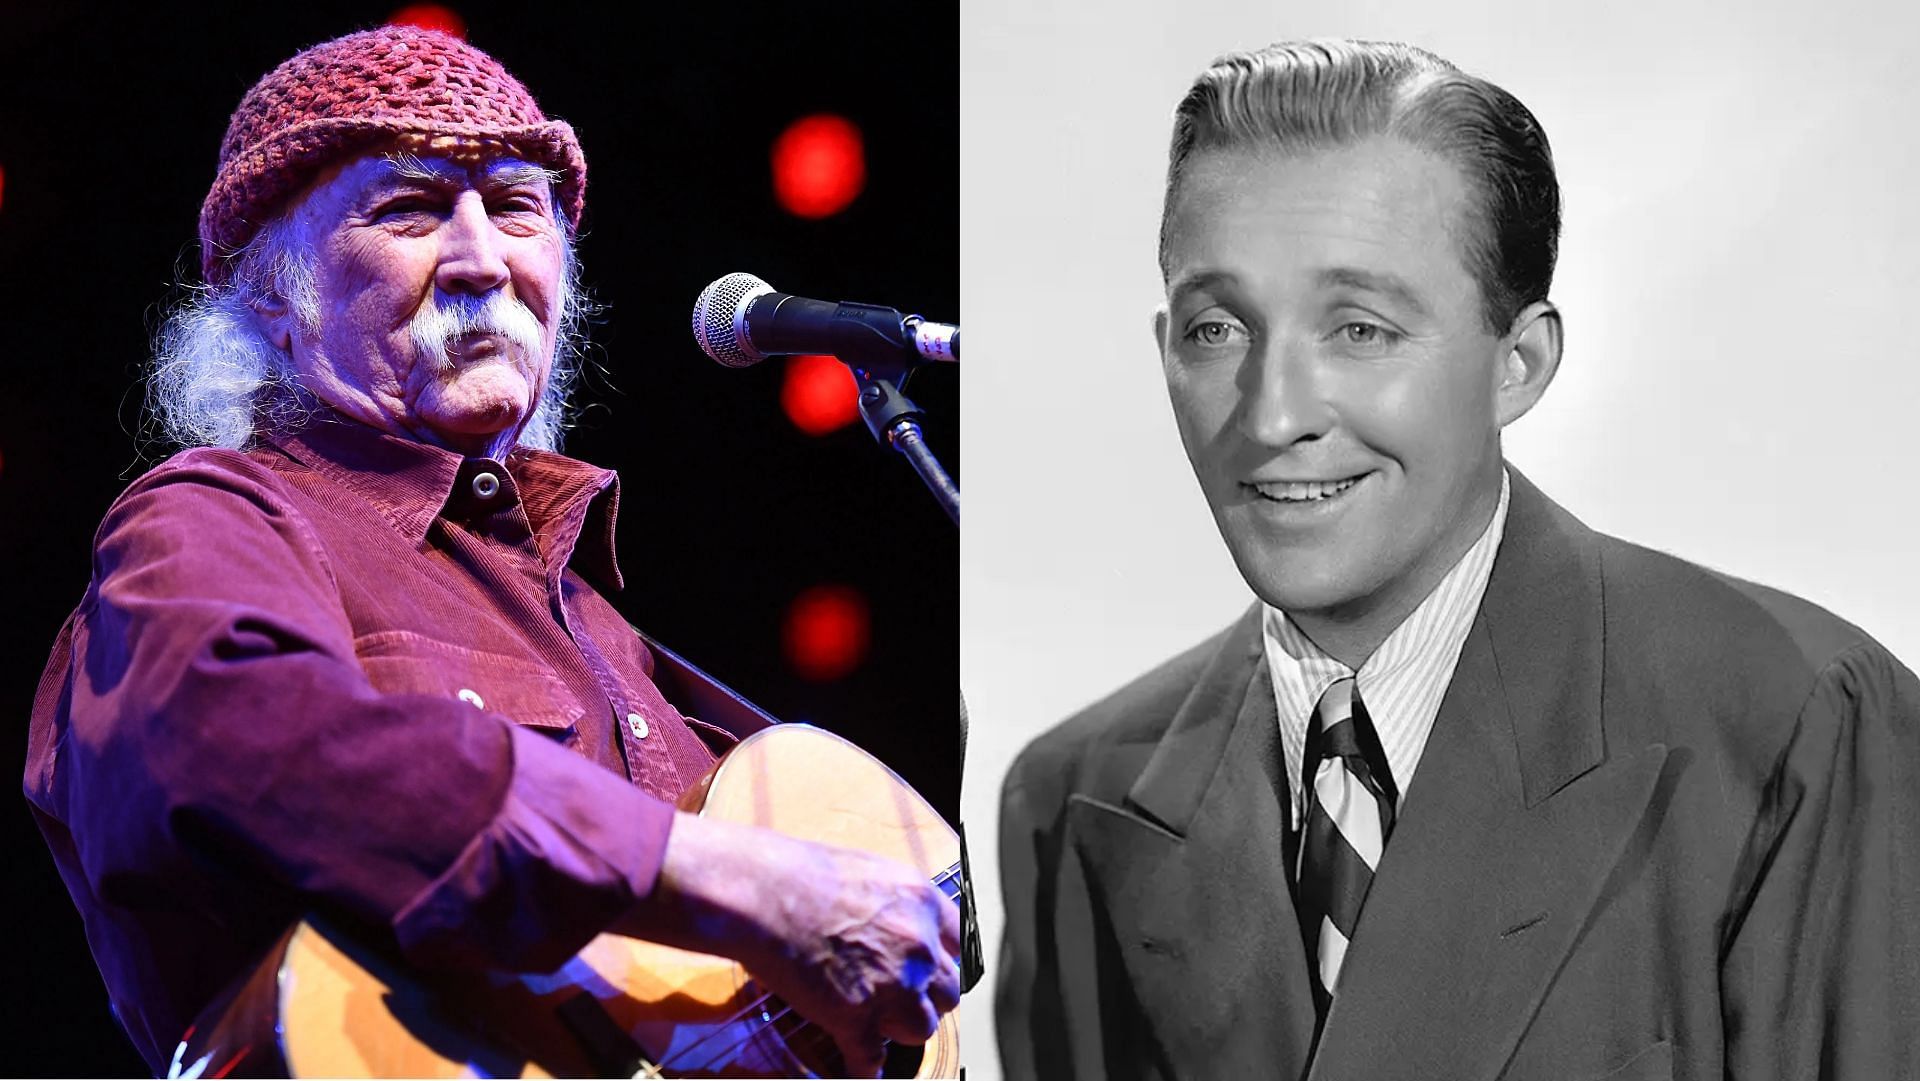 David Crosby and Bill Crosby were not related. (Image via Scott Dudelson/Getty, NBCU Photo Bank/Getty)